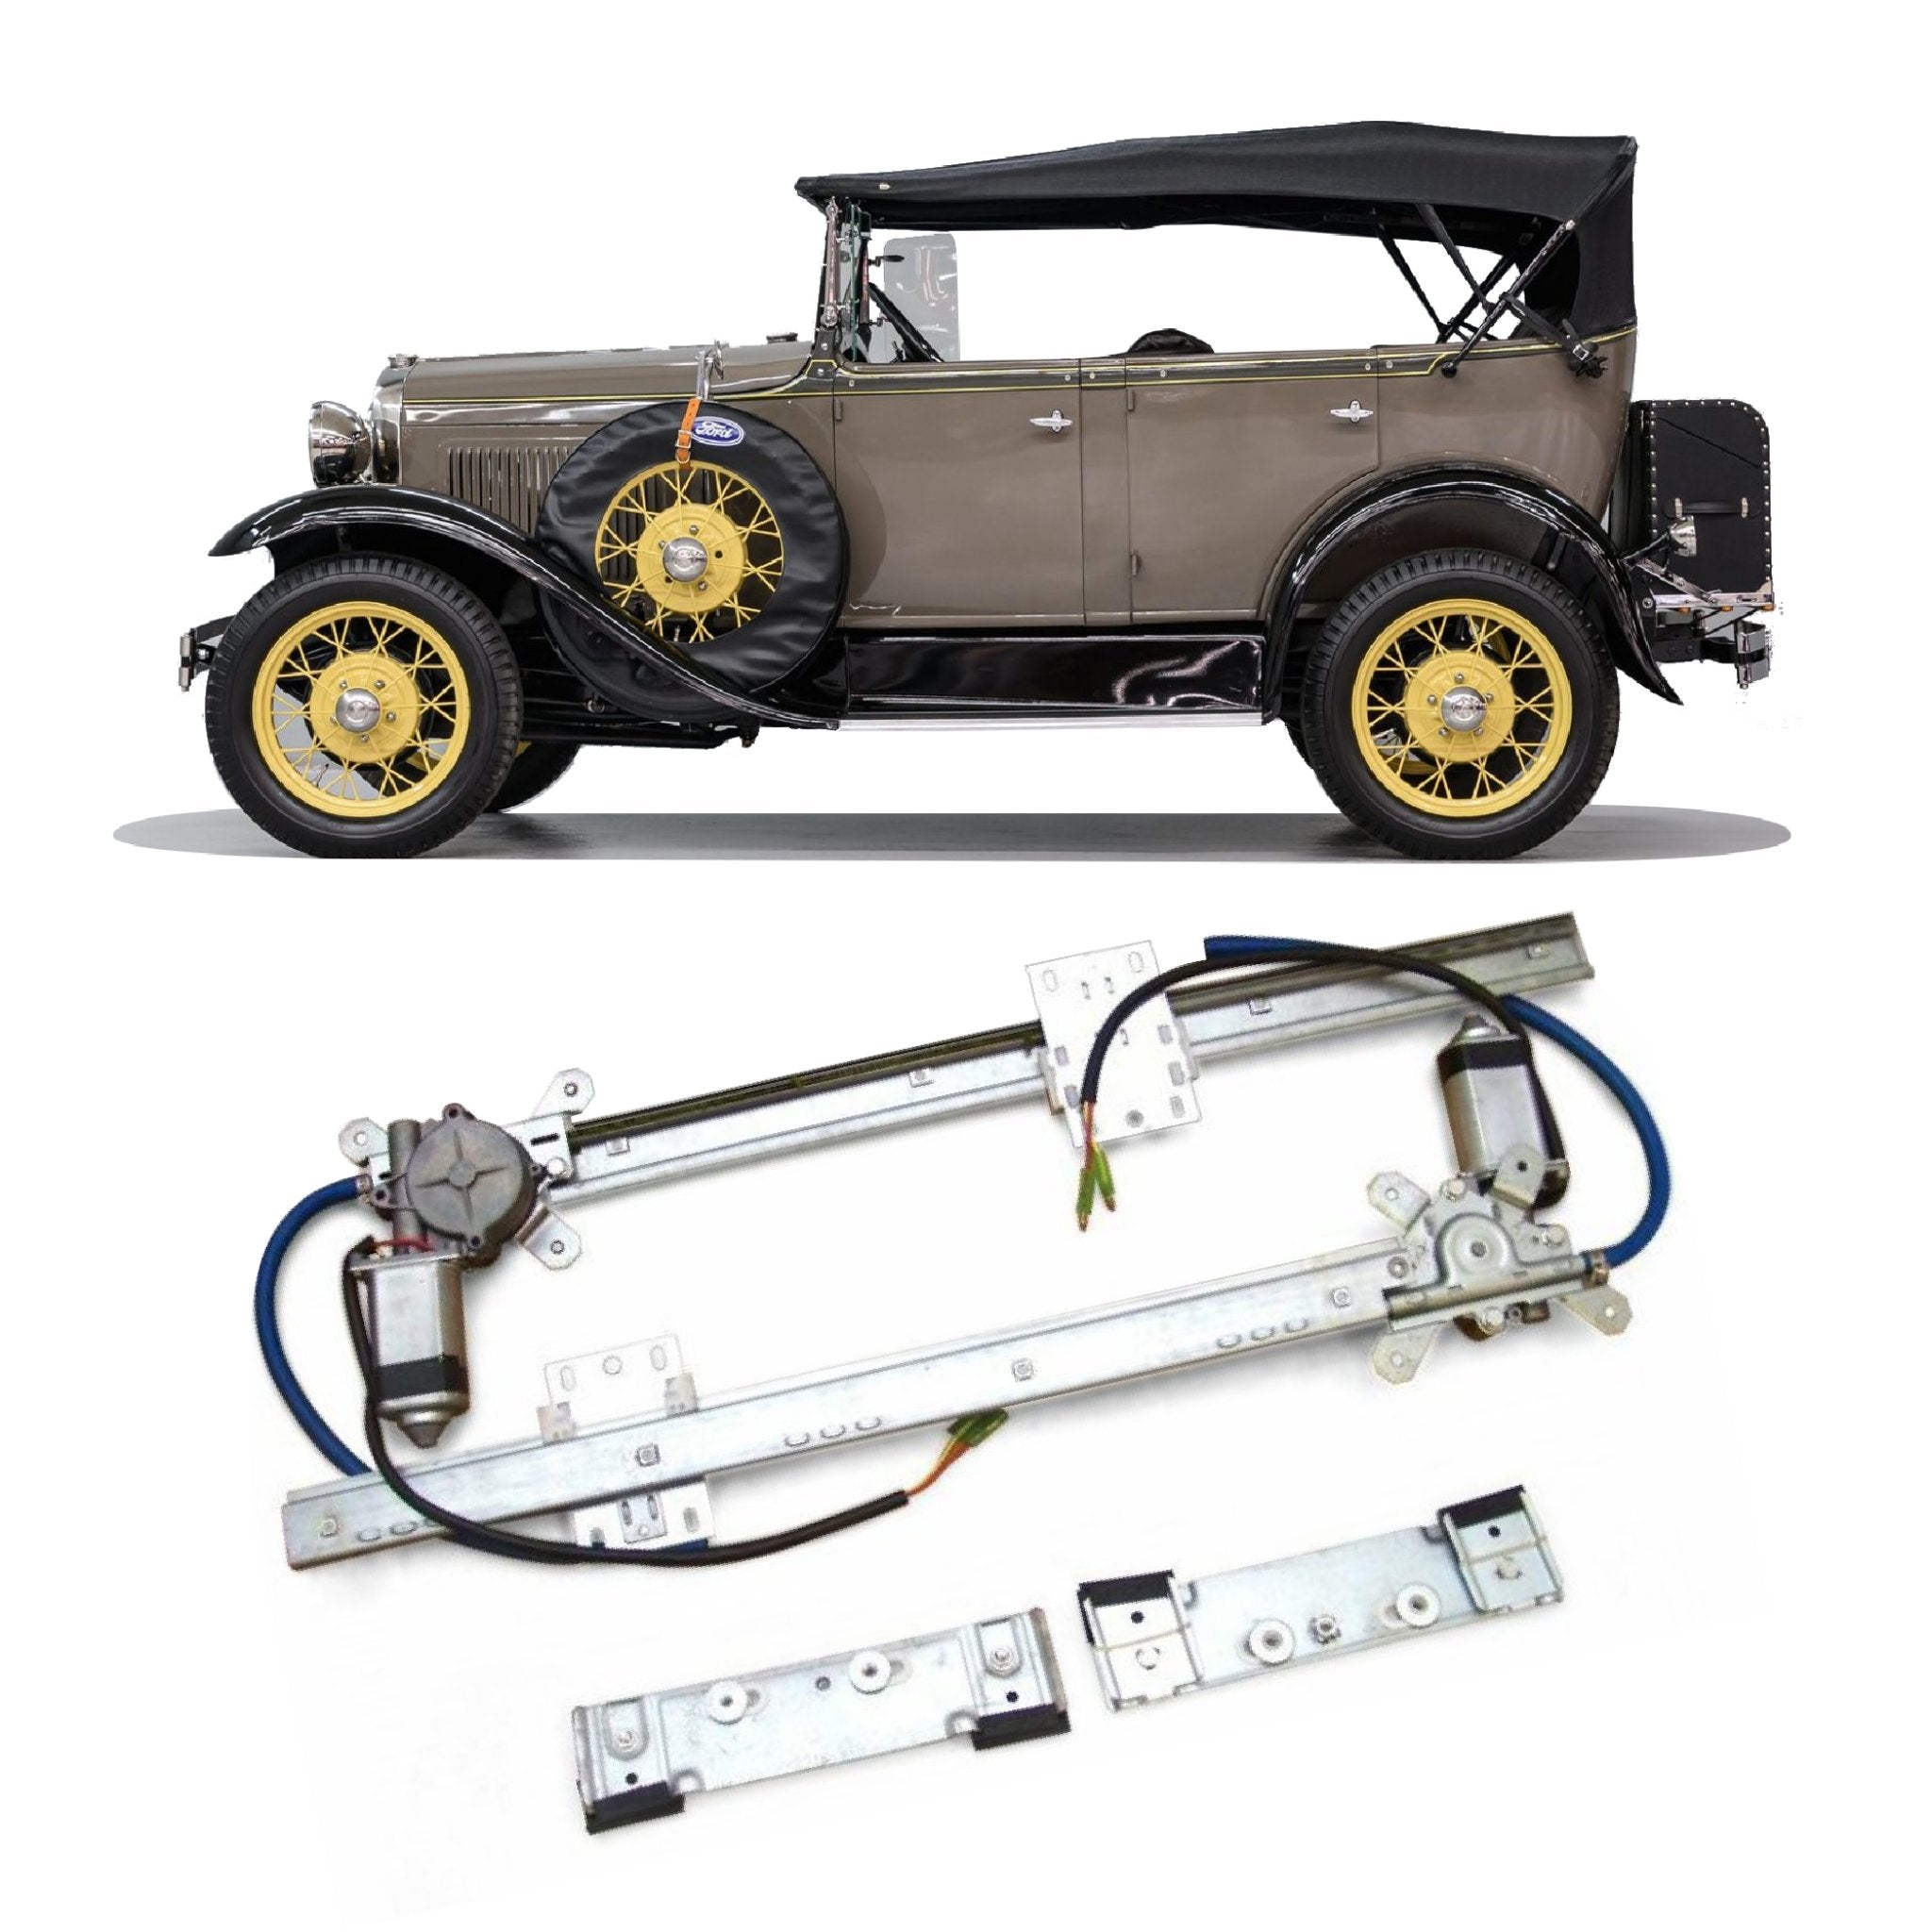 2 Door Flat Glass Electric Power Window Conversion Kit for 1930 Model A Phaeton